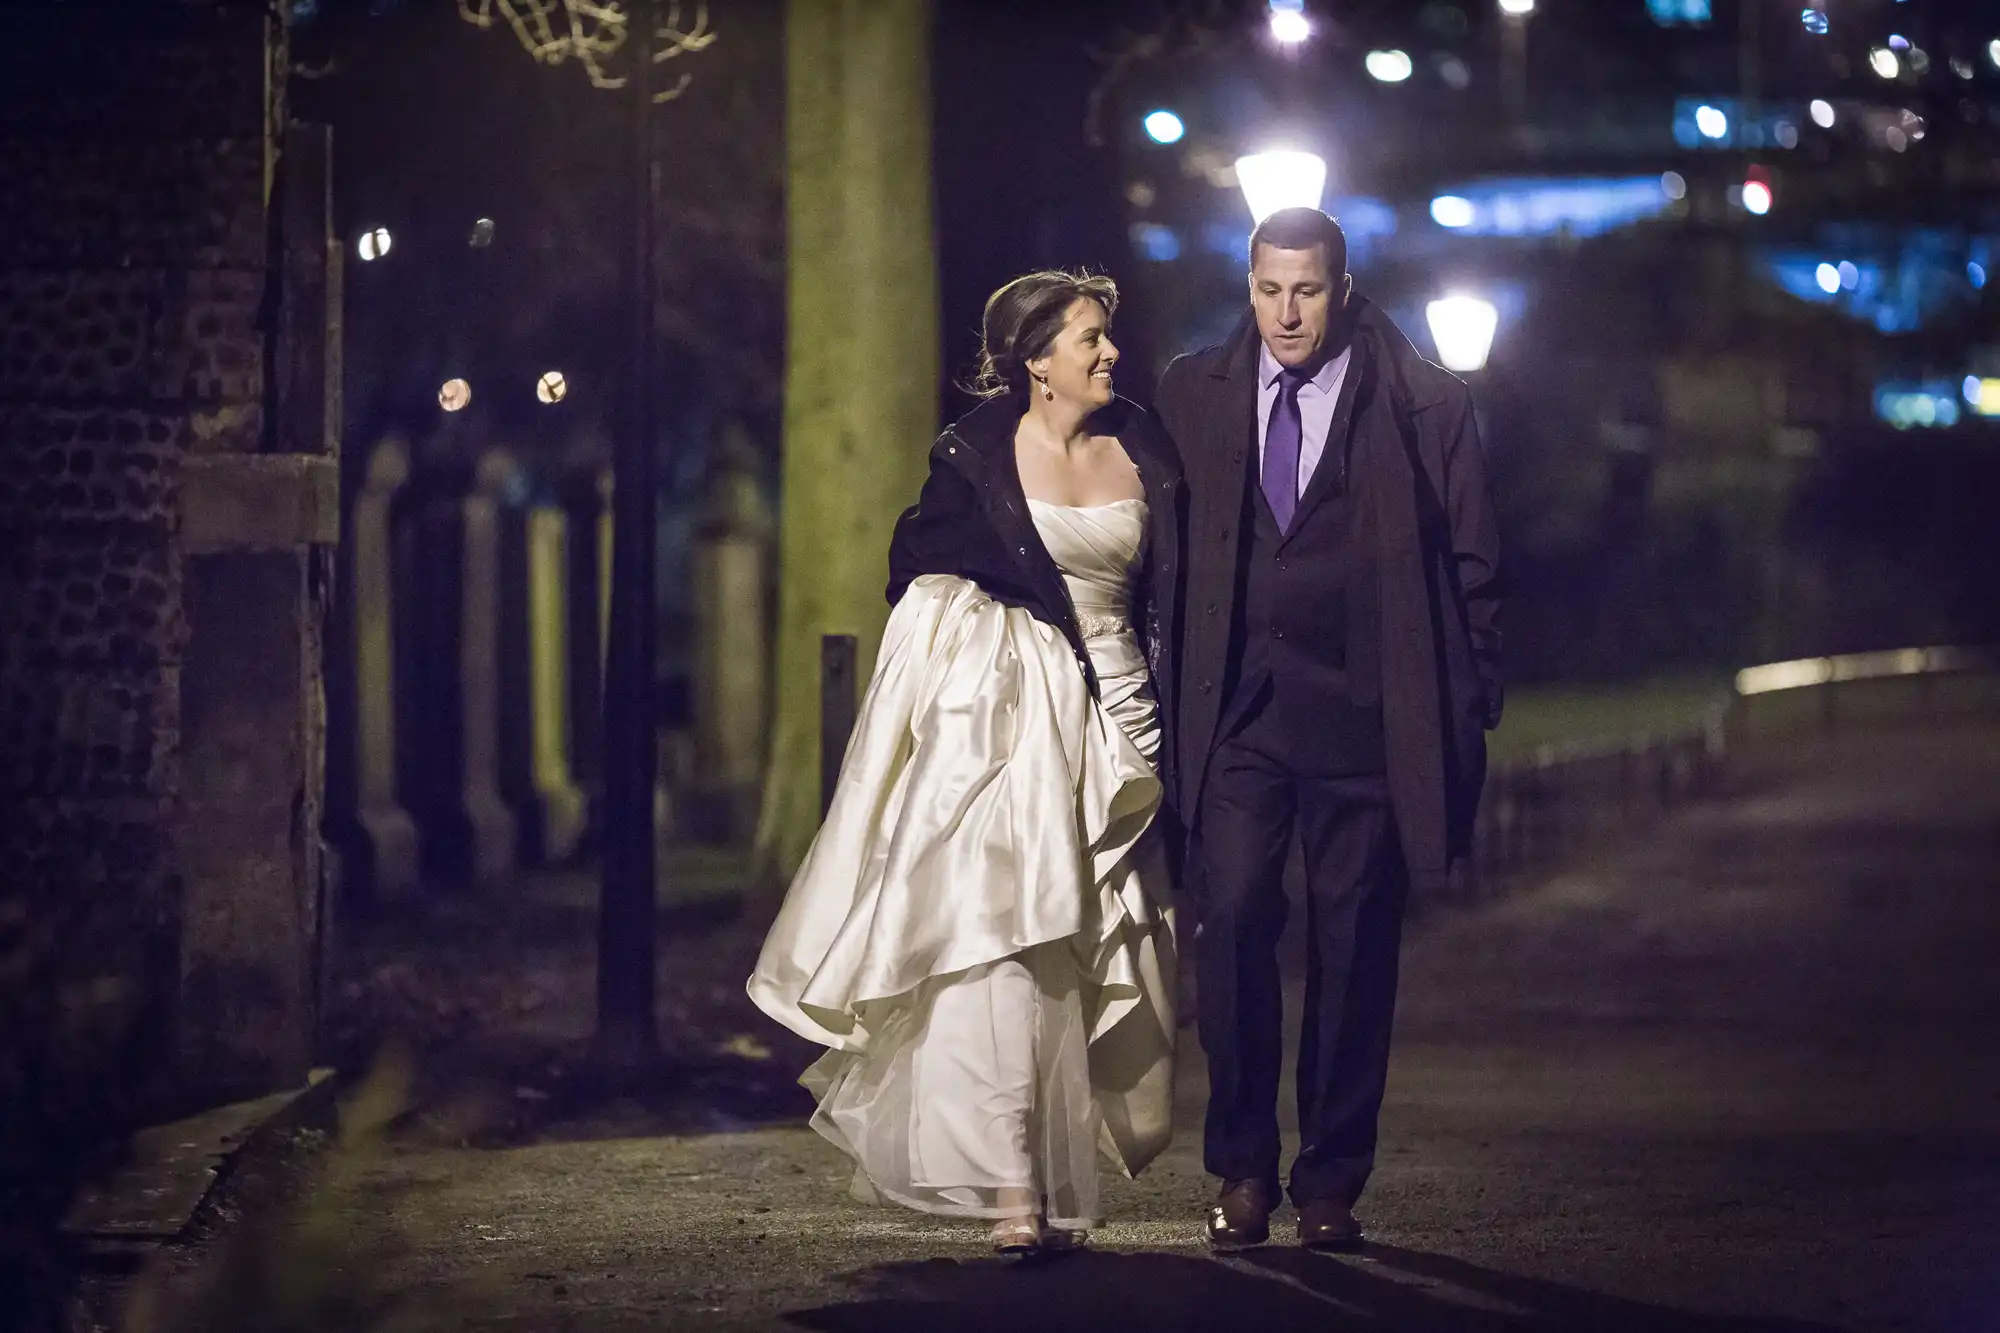 A bride in a white dress and a groom in a suit walk hand in hand along a dimly lit path at night, smiling and talking.